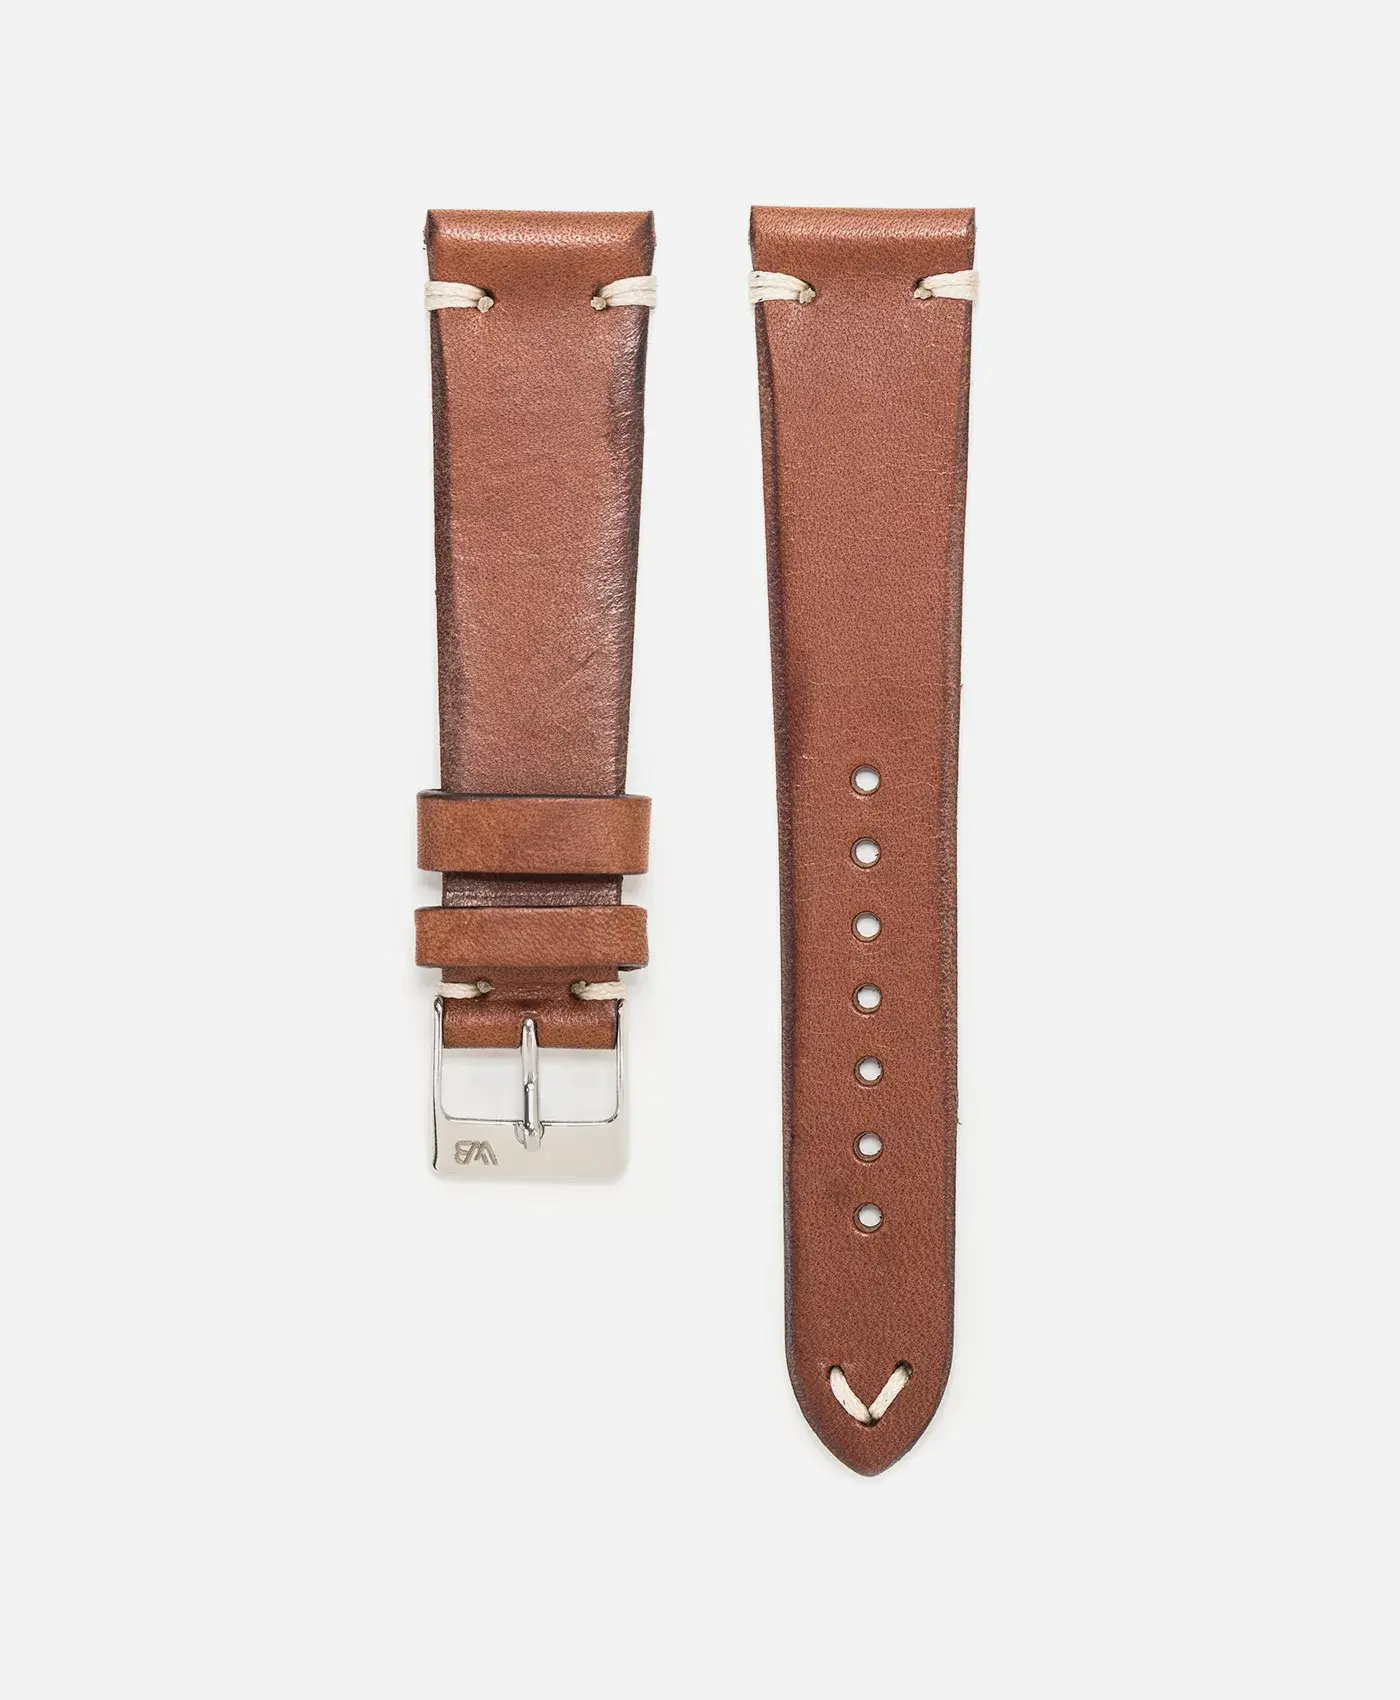 Watch Straps and Watch Bands Online - CHROONOO